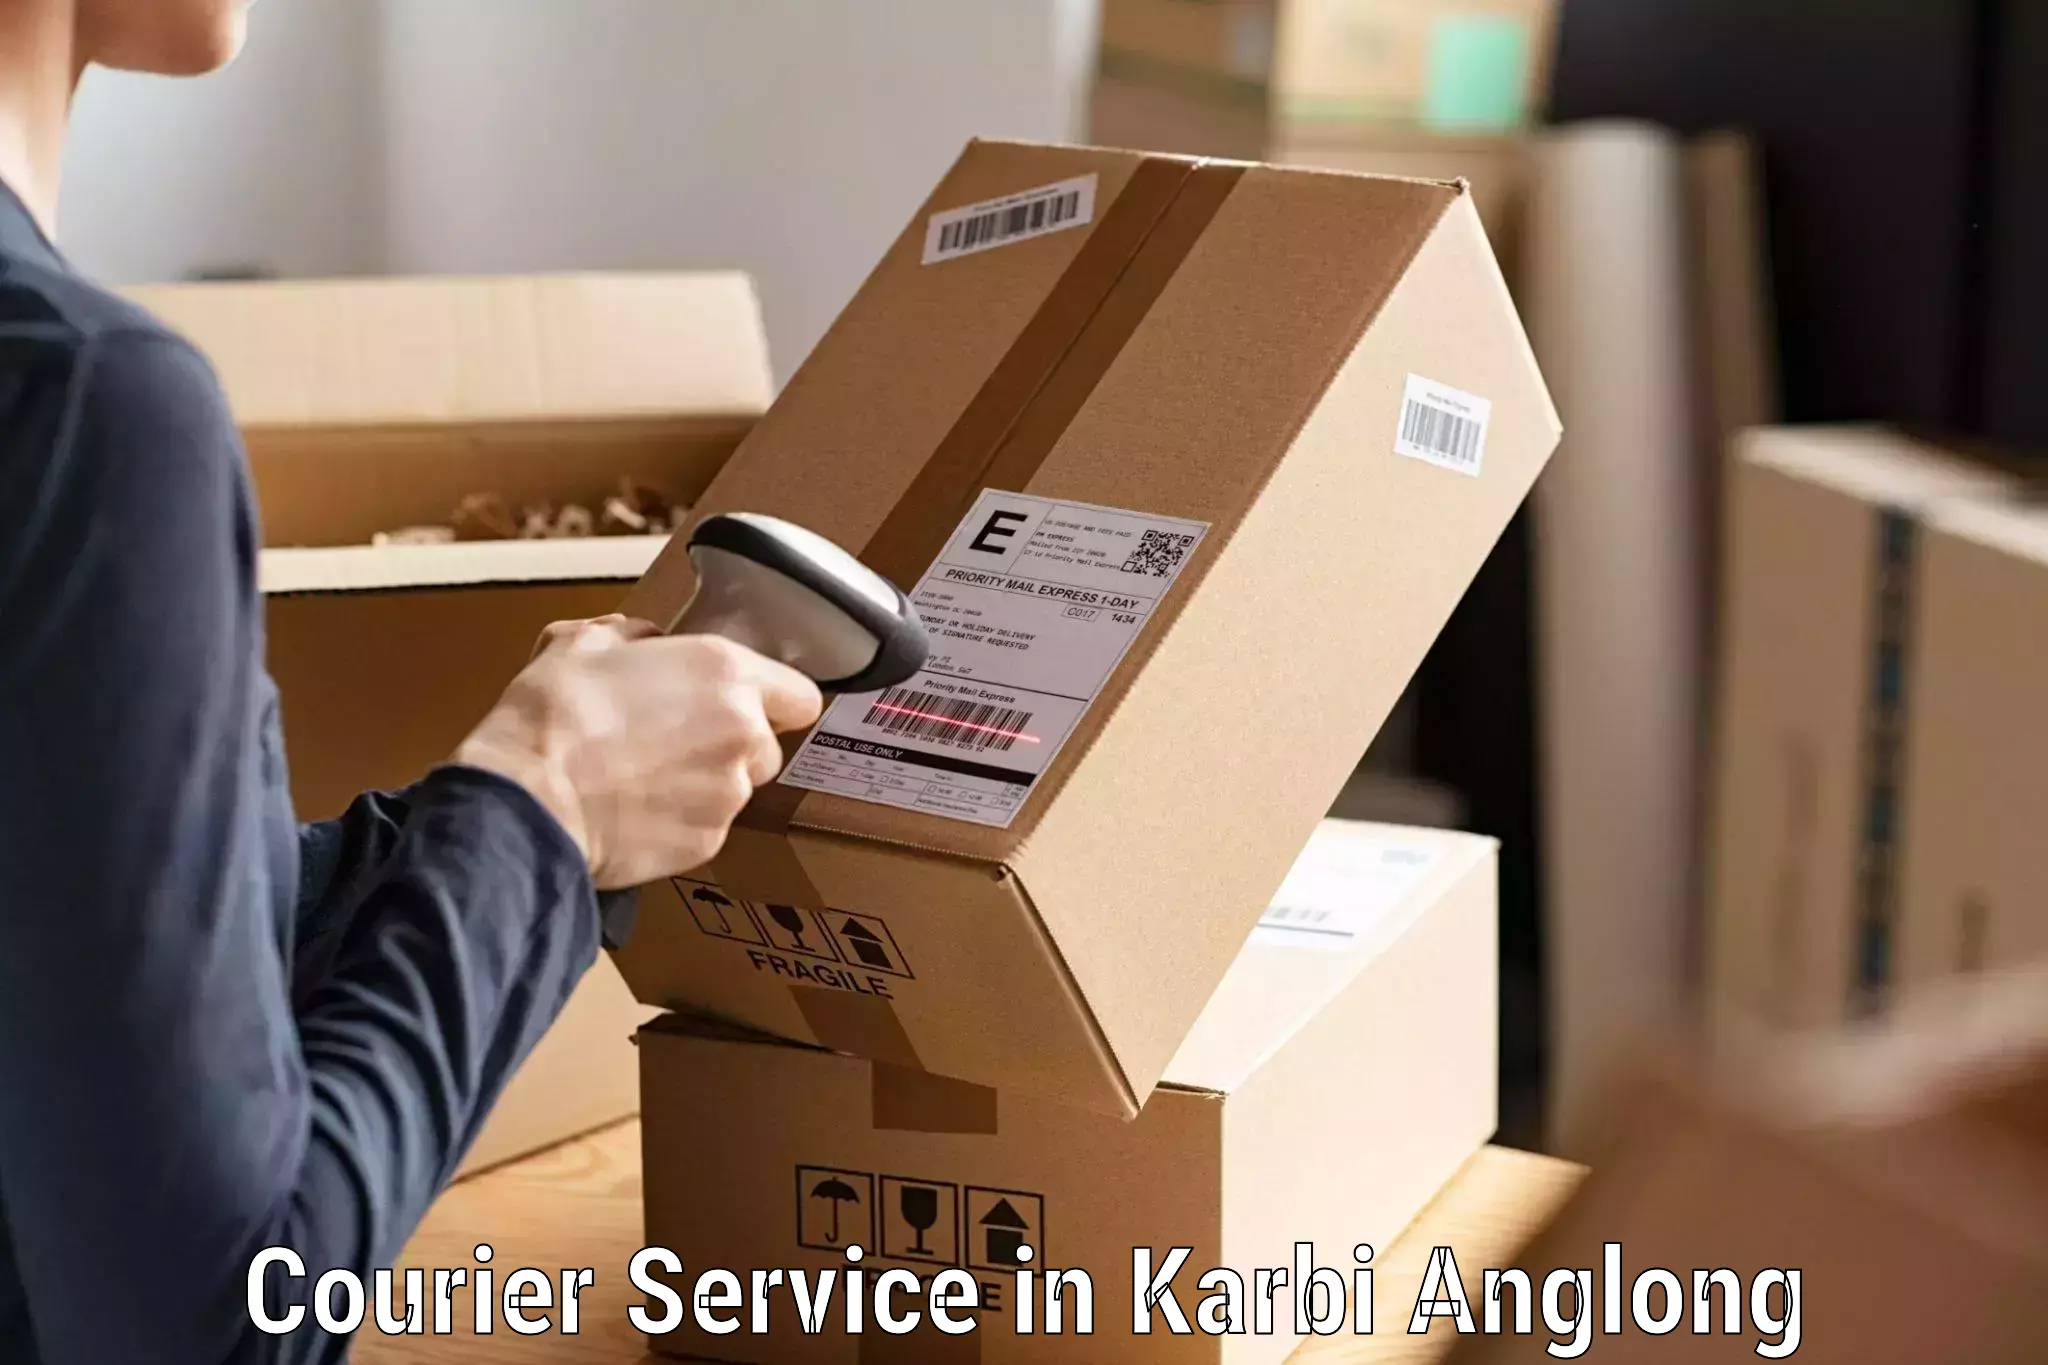 Round-the-clock parcel delivery in Karbi Anglong